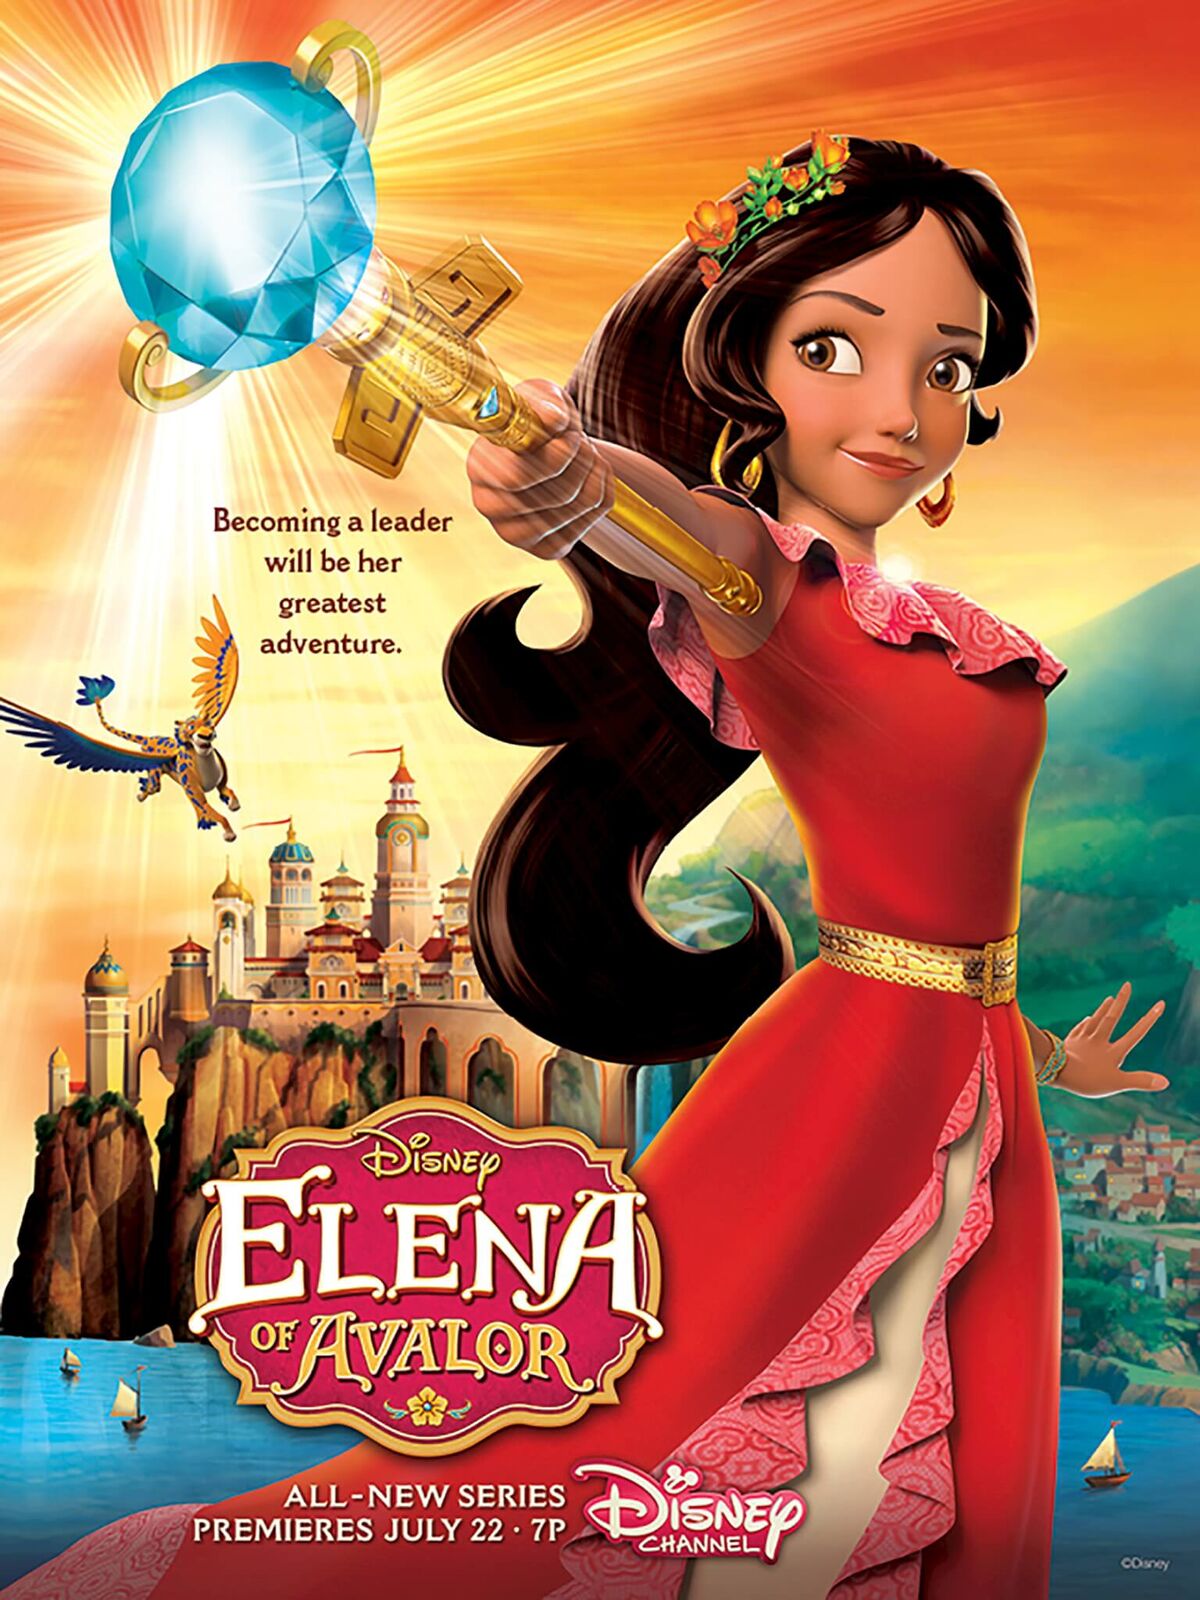 ELENA OF AVALOR - Princess Elena of Avalor will make her royal debut in the highly anticipated animated series Elena of Avalor, with a one-hour premiere event FRIDAY, JULY 22 (7:00-8:00 p.m., EDT), on Disney Channel. (Disney Channel)